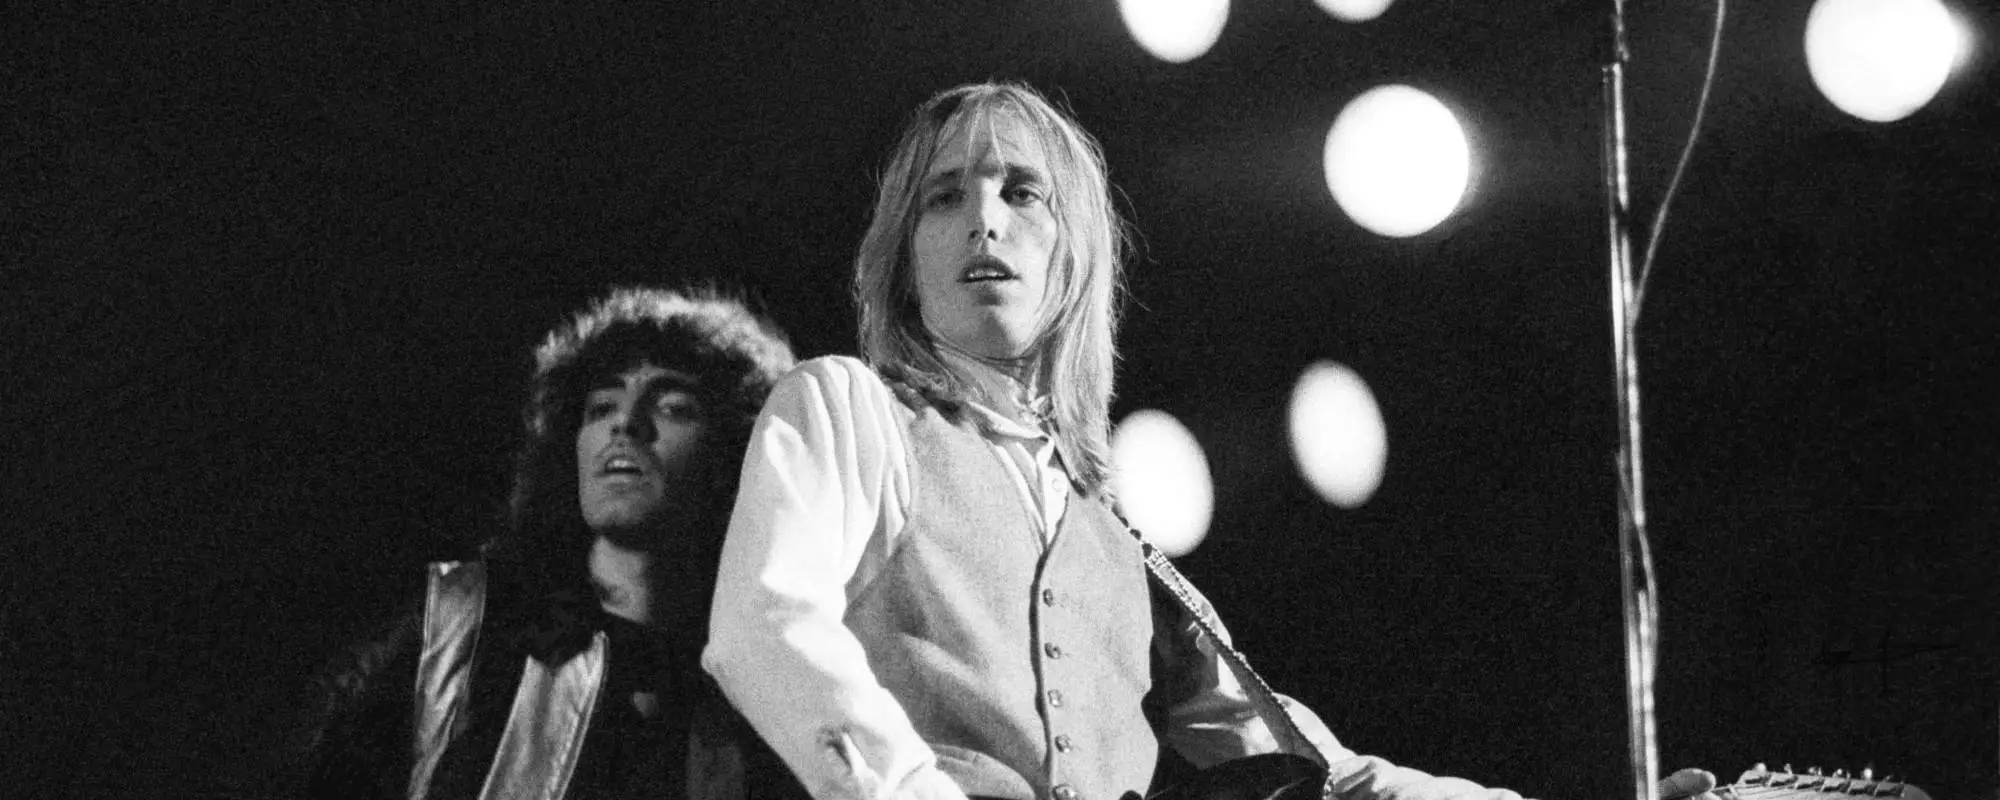 What Do the Lyrics of Tom Petty’s Now-Politically-Charged Song “I Won’t Back Down” Mean?